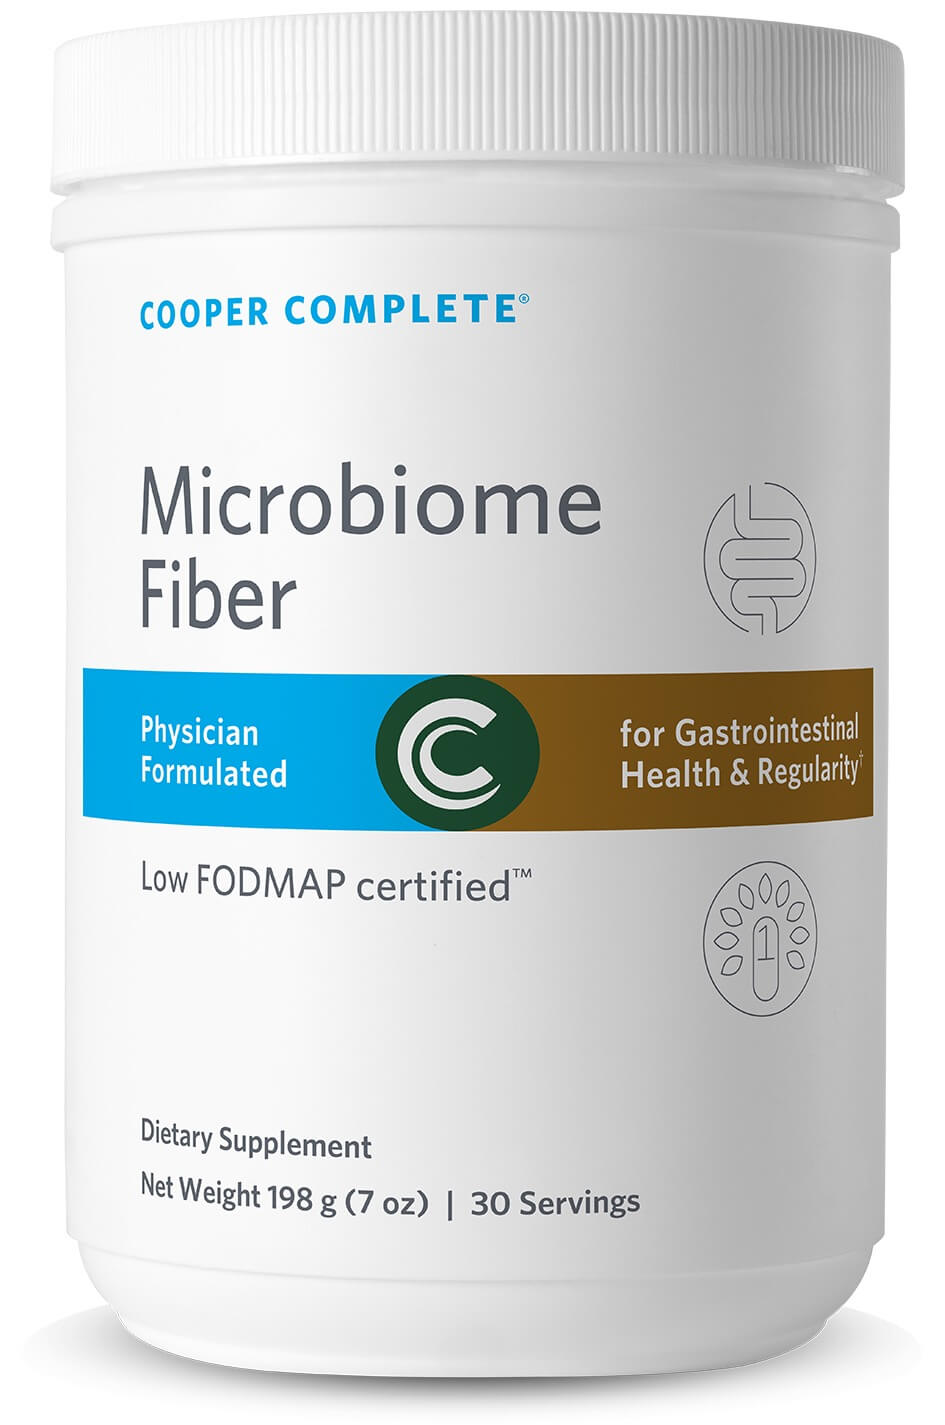 Photo of Cooper Complete Microbiome Fiber Supplement bottle.